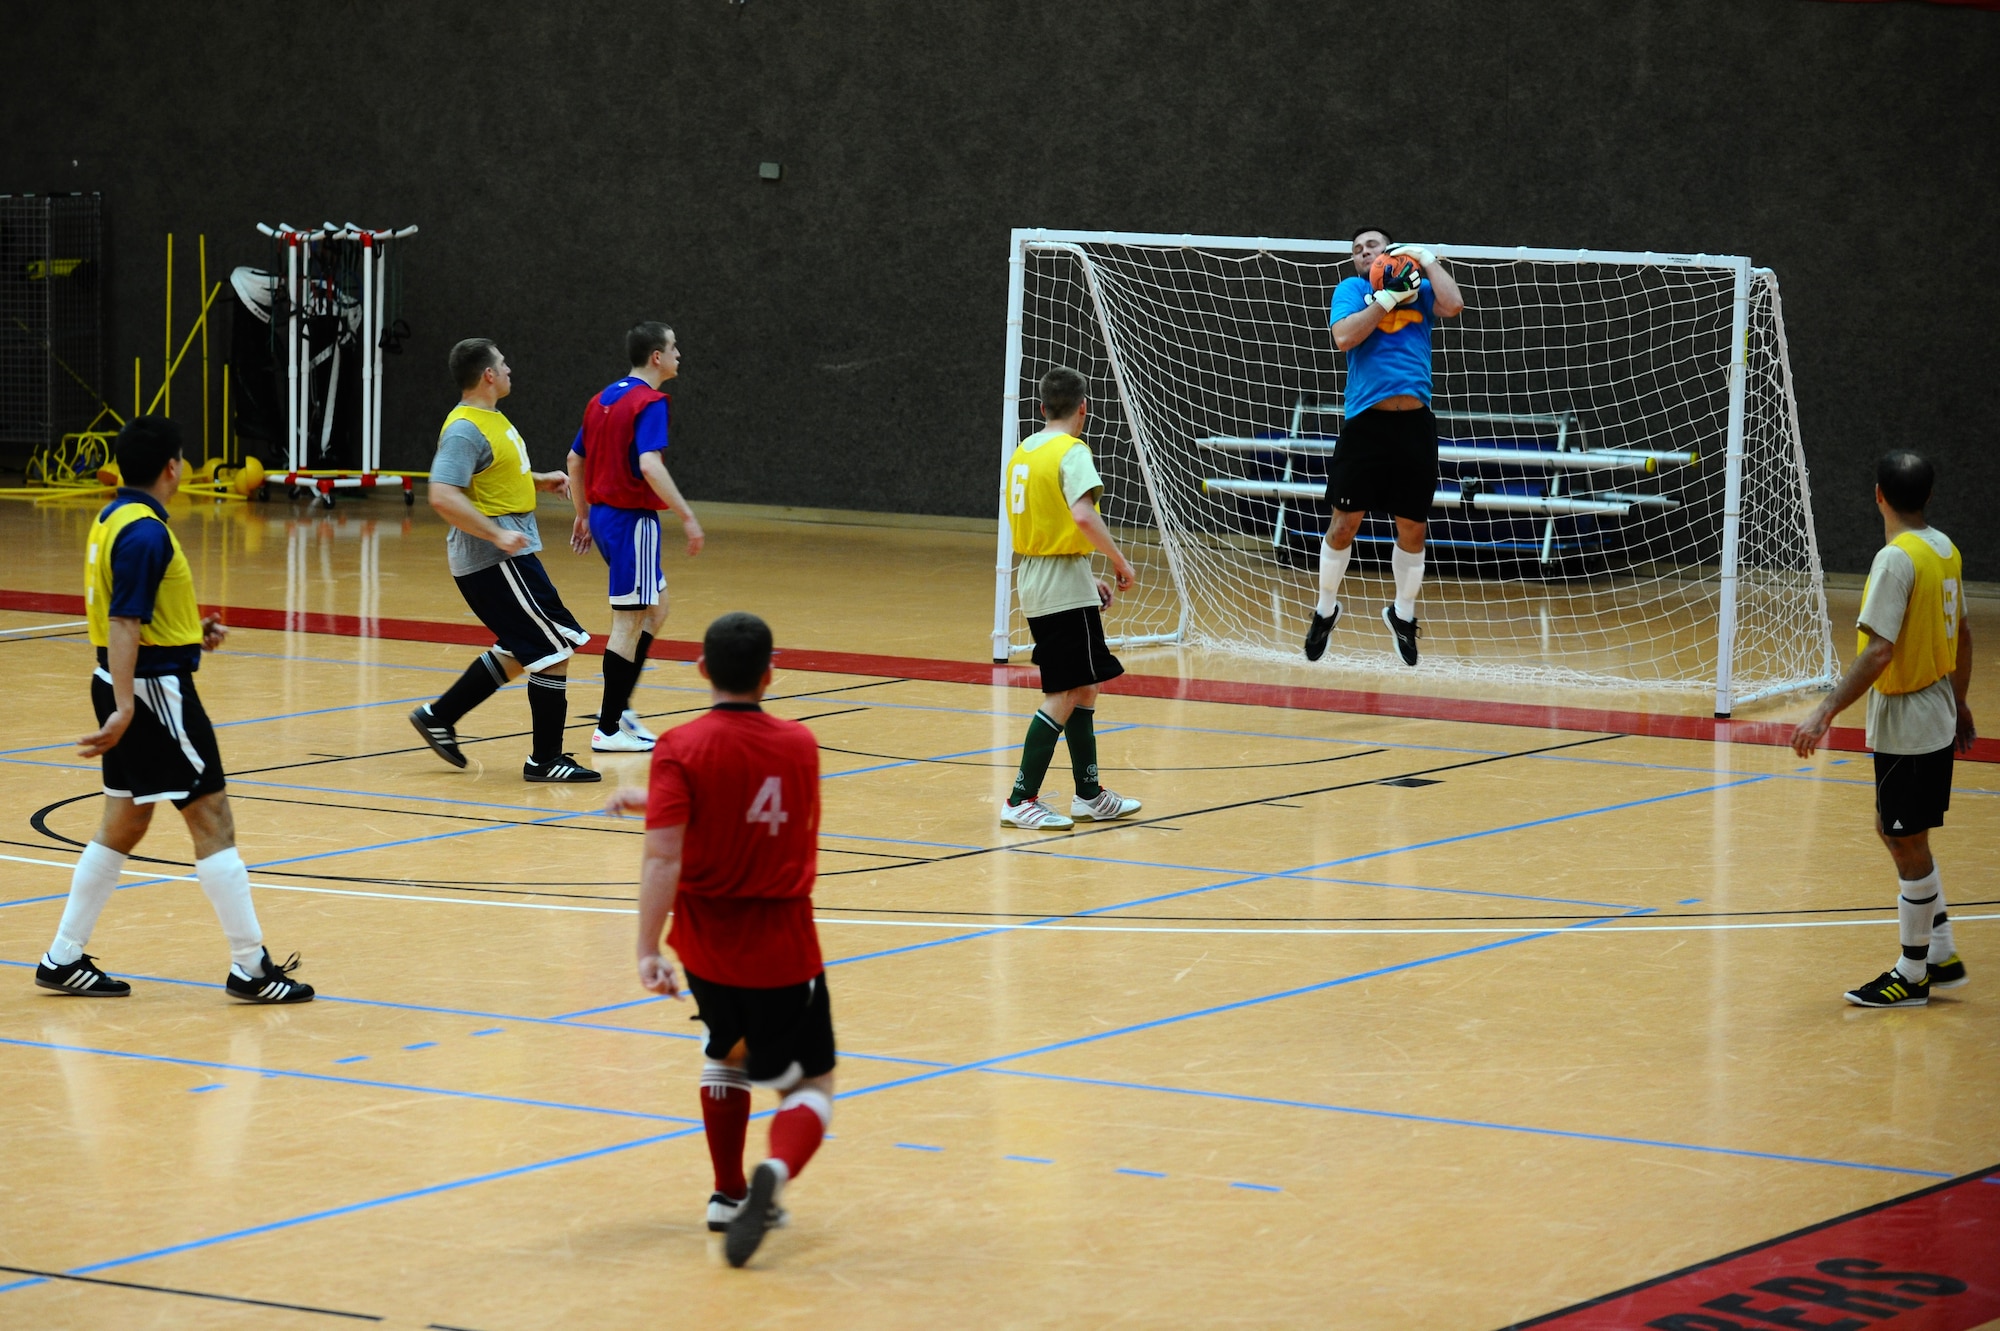 SPANGDAHLEM AIR BASE, Germany – Kyle Jones, 81st Fighter Squadron, makes a save during the indoor soccer championship at the Skelton Memorial Fitness Center here June 12. The 52nd Force Support Squadron defeated the 81st FS in the first game 7-6. The 81st FS won the double-elimination championship after winning the second game 9-5. (U.S. Air Force photo by Airman 1st Class Matthew B. Fredericks/Released)